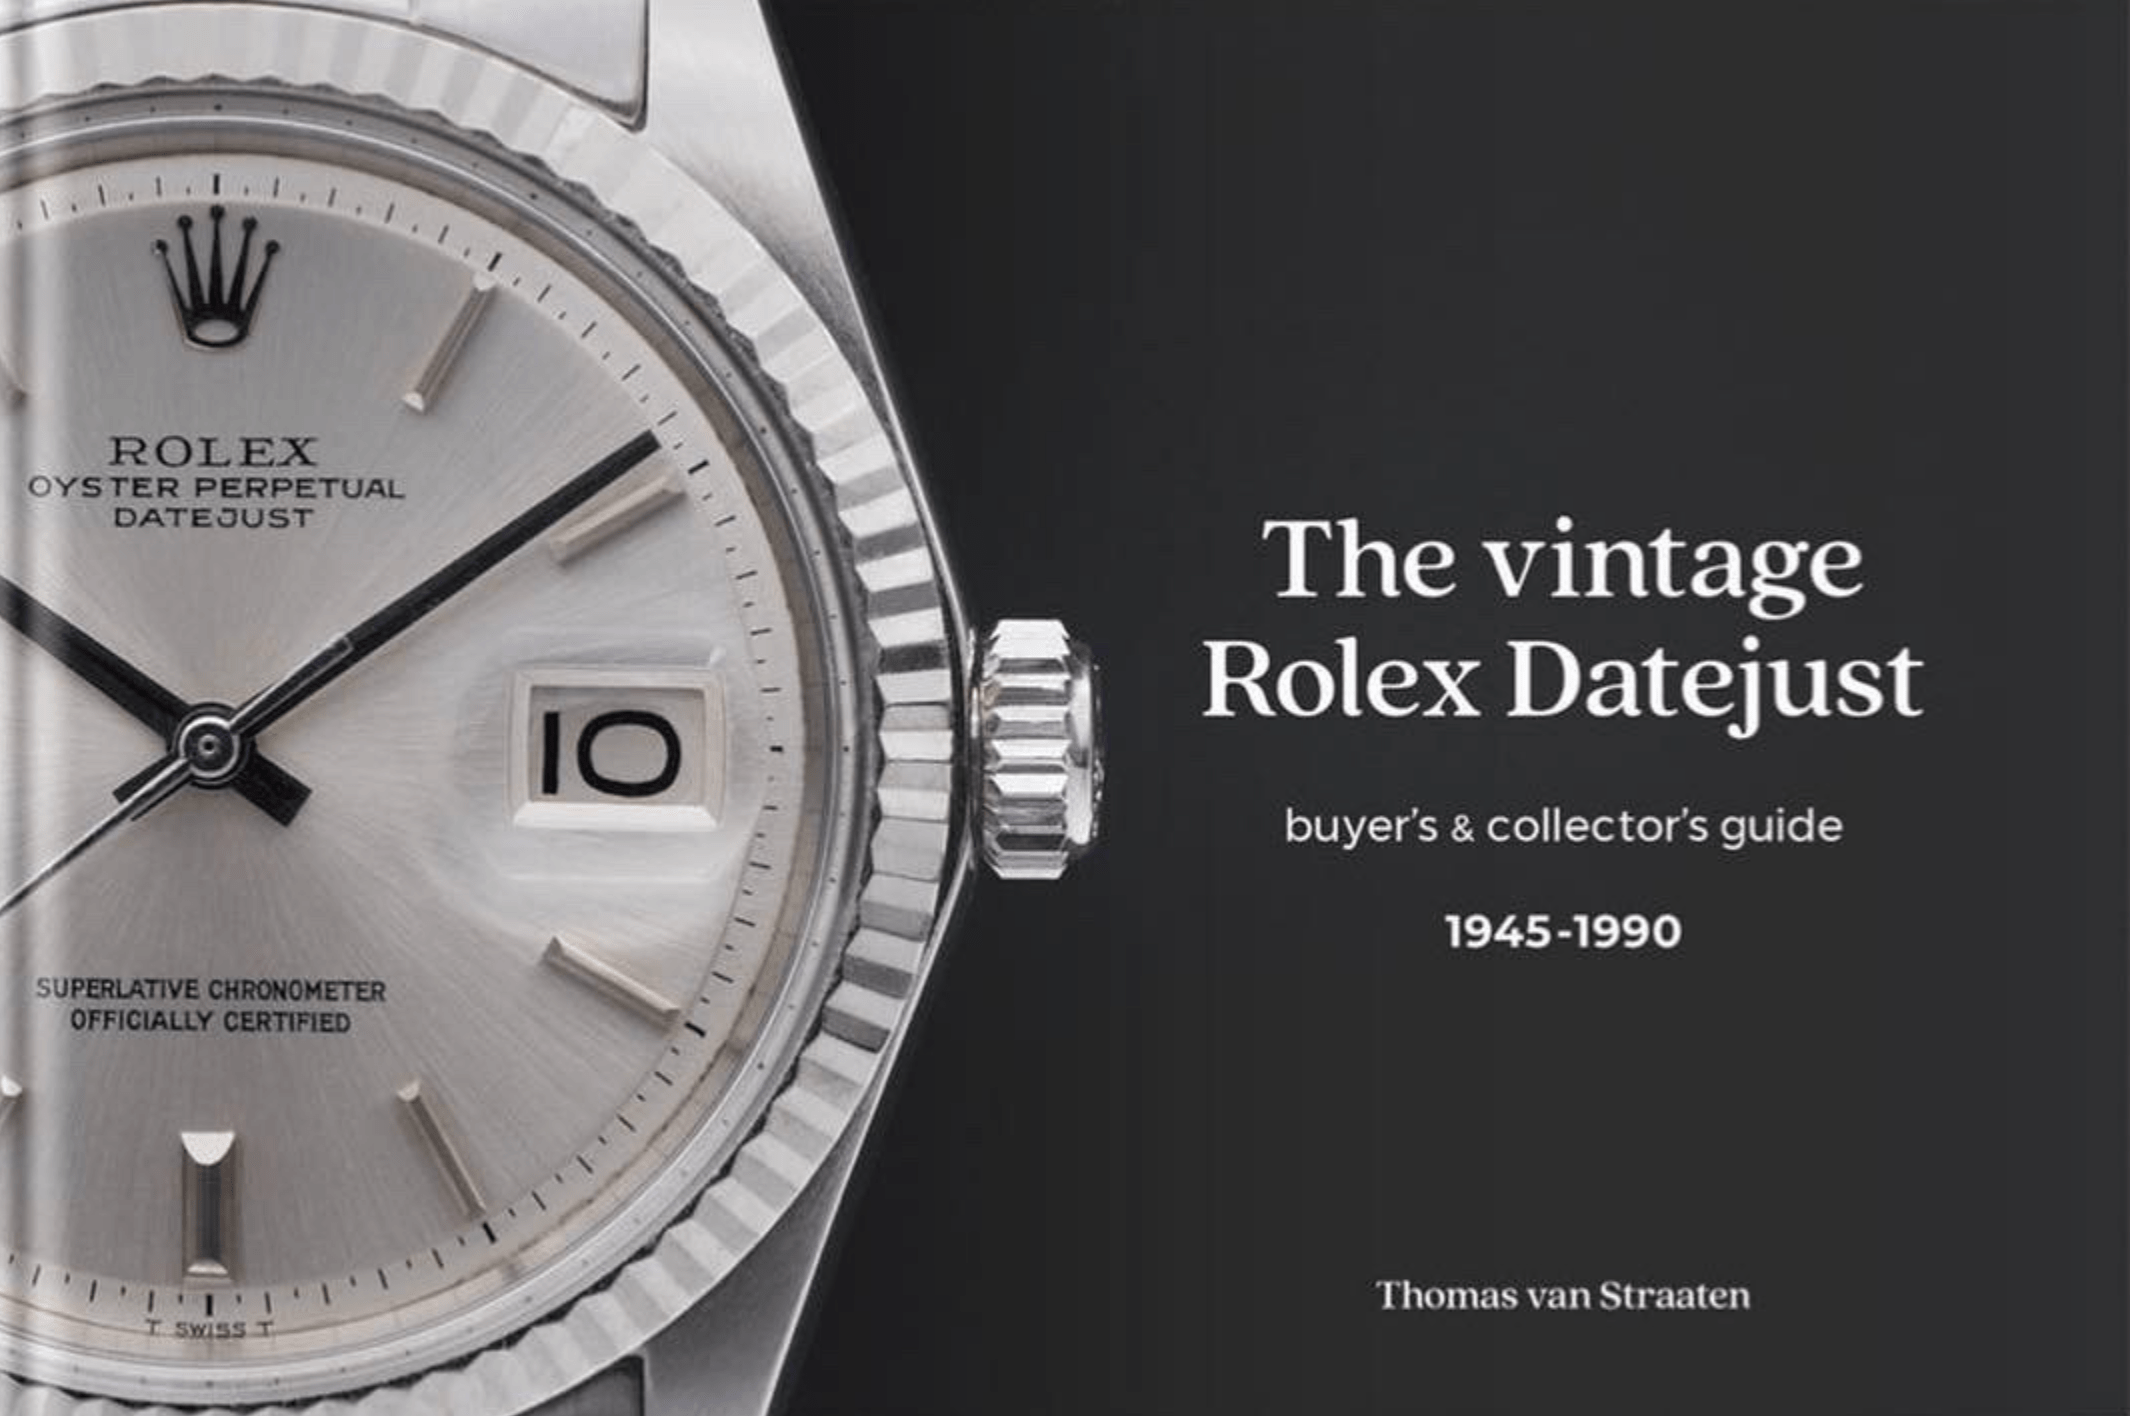 The Vintage Rolex Datejust Buyer's & Collector's Guide